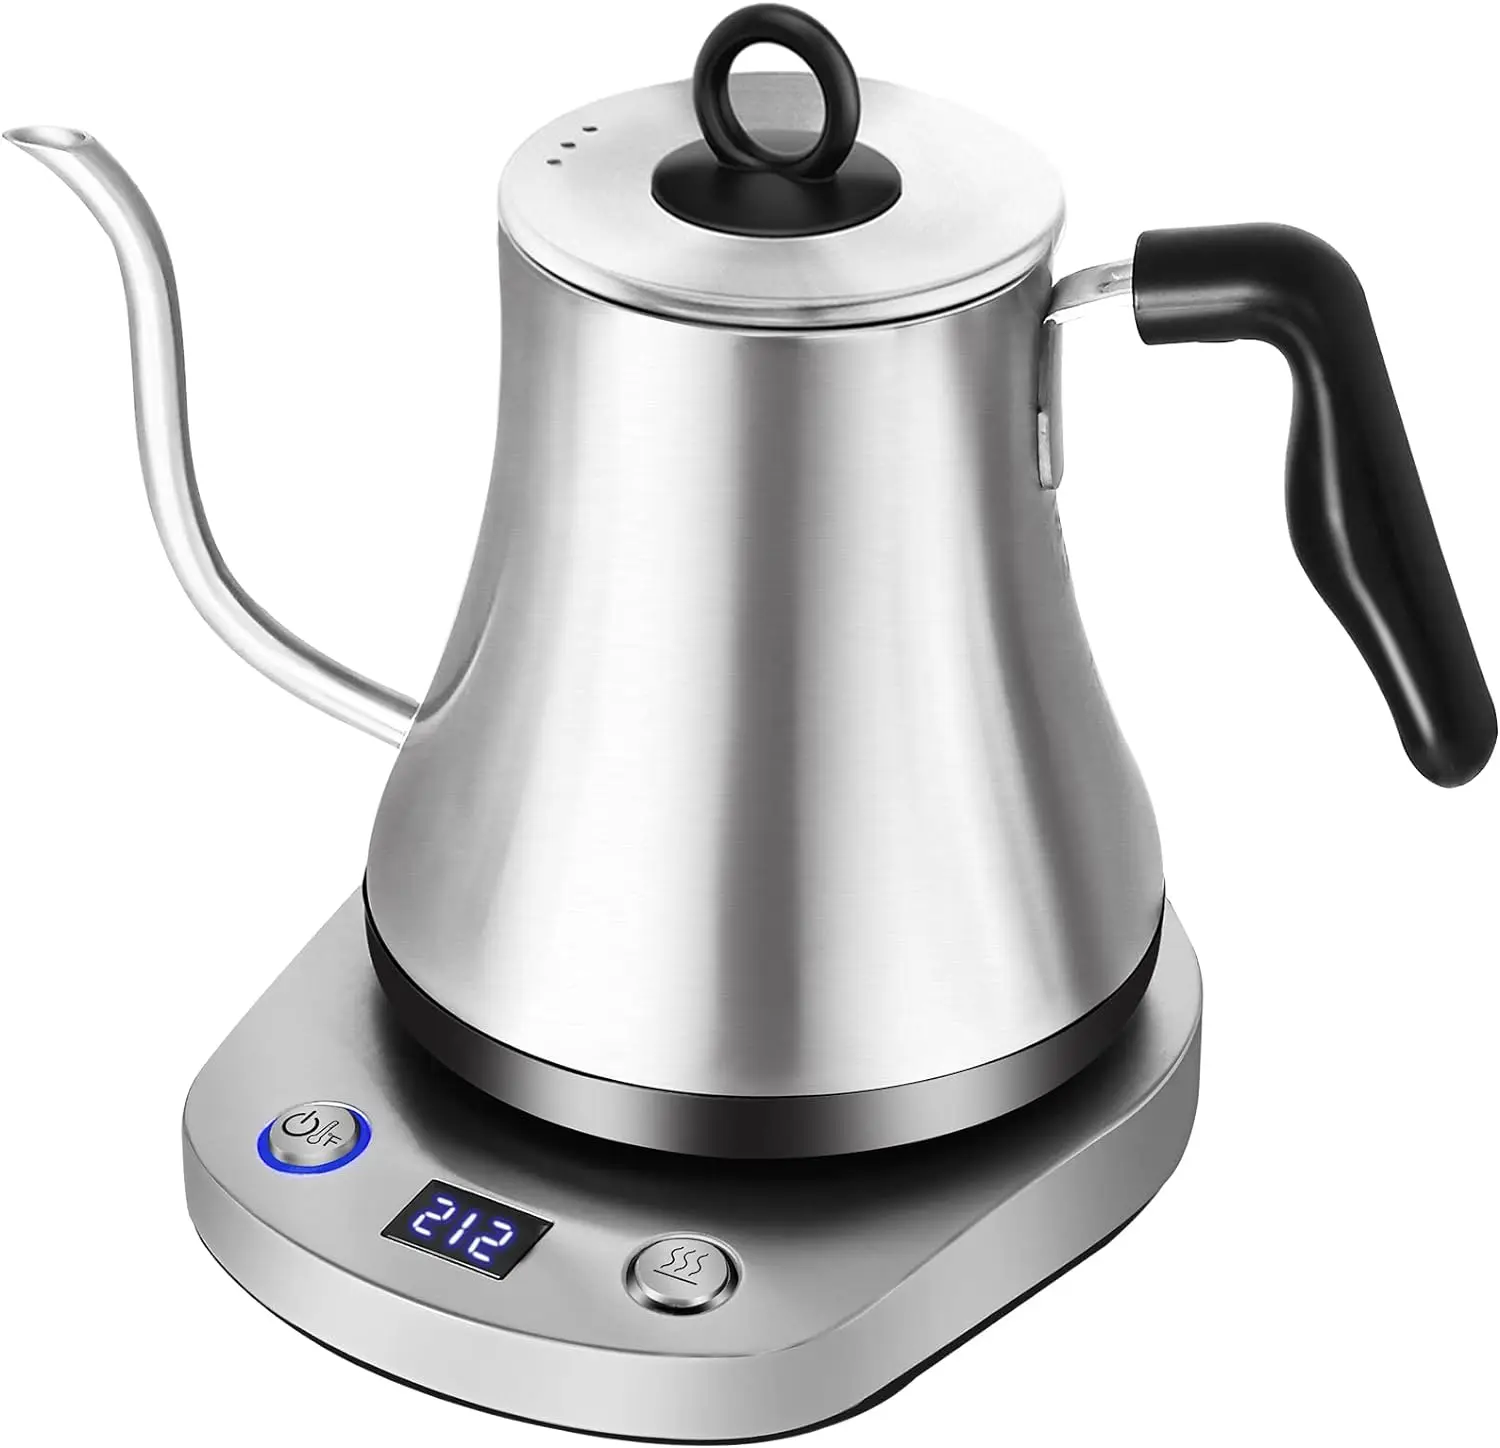 

Kettle with Temperature - Pour Over Kettle for Coffee and Tea with 6 Temp Presets - 100% Stainless Steel Inner - 1000W Rapid He